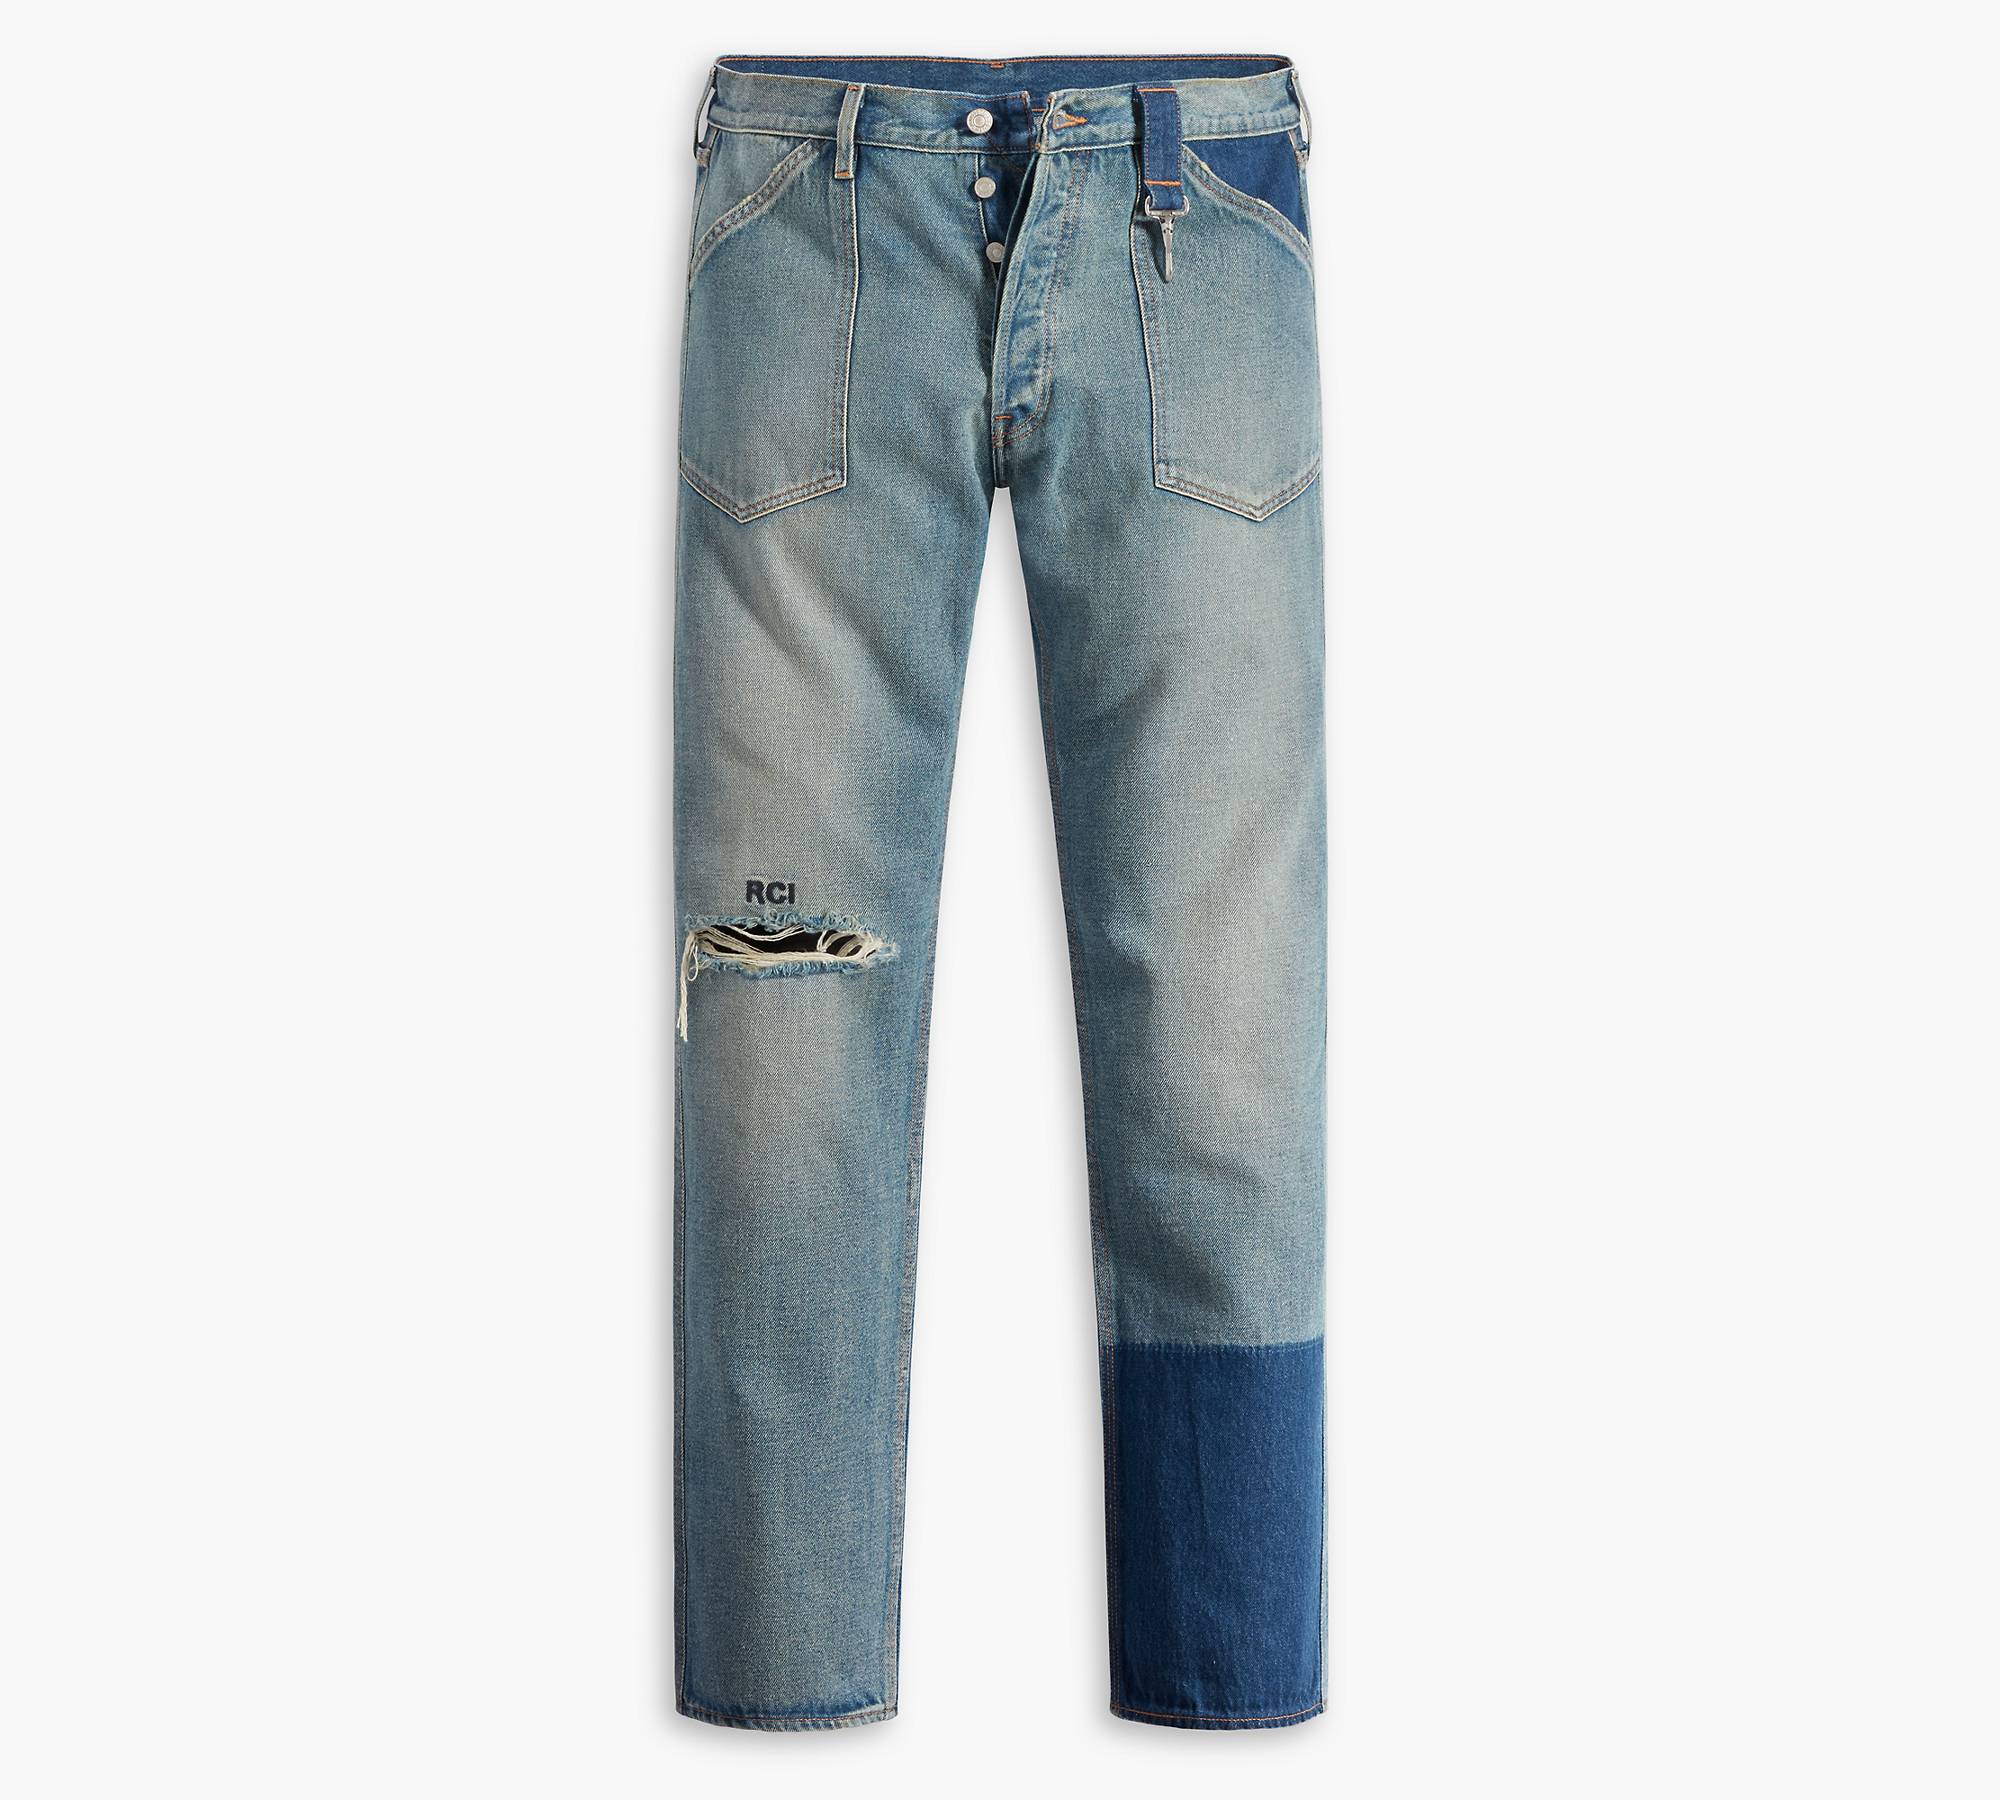 Levi's® X Reese Cooper® Men’s Straight Fit Jeans - Neutral | Levi's® GB